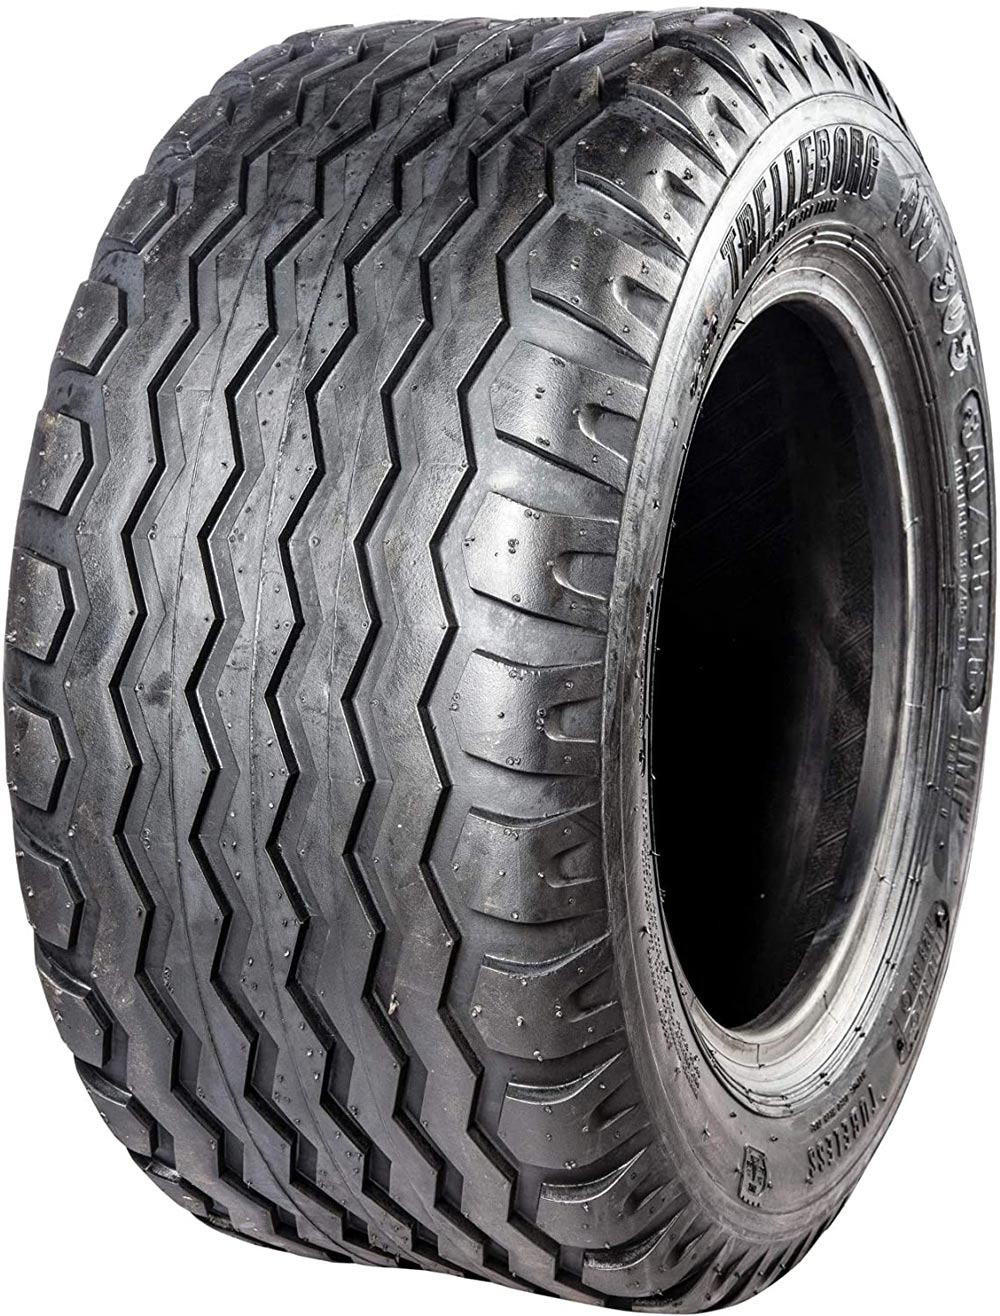 product_type-industrial_tires Trelleborg AW 305 TL 340/55 R16 T